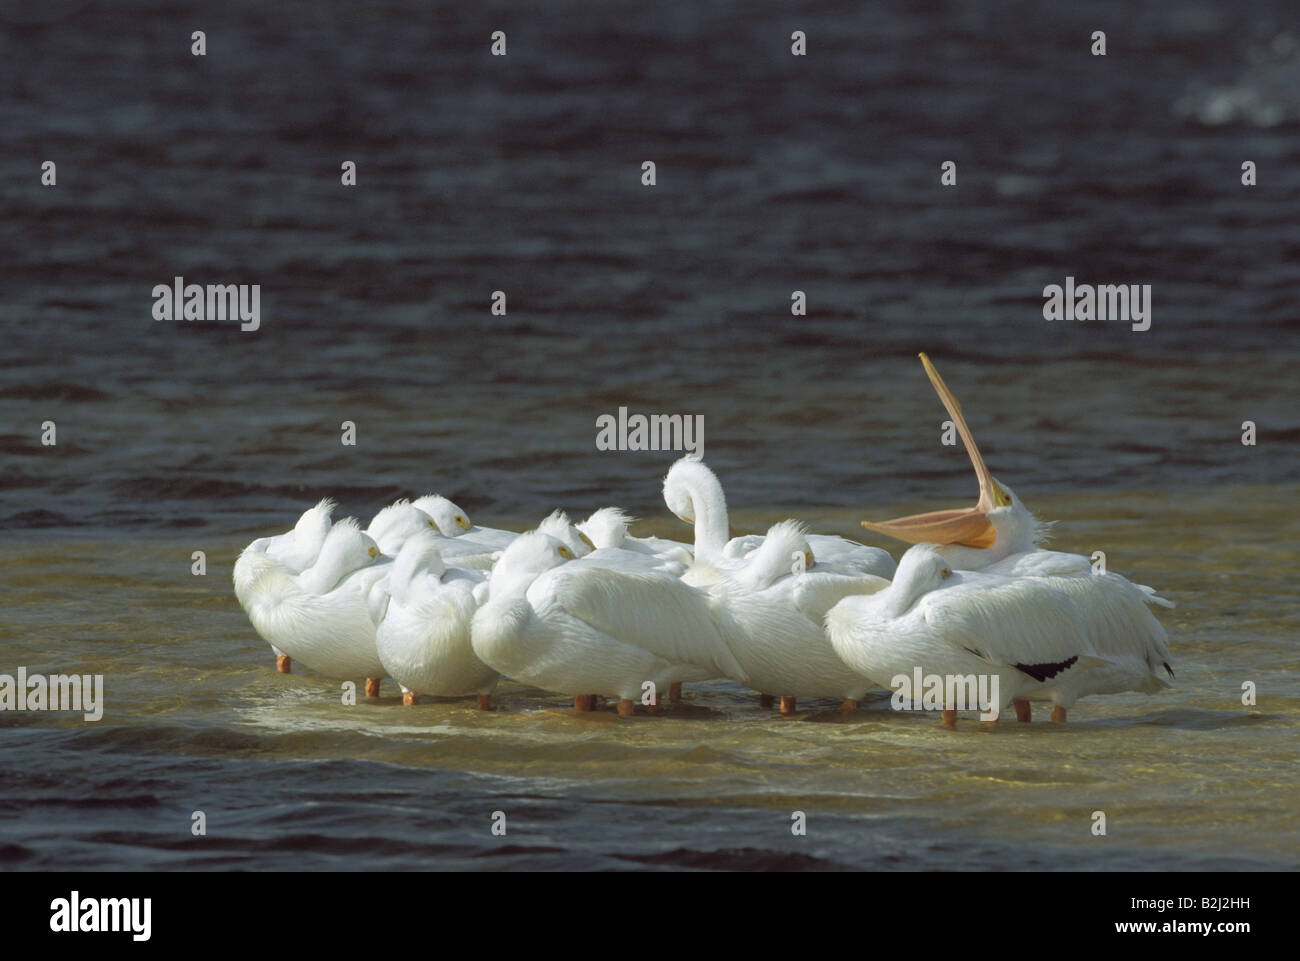 zoology, avian / bird, Pelecanidae, American White Pelican (Pelecanus erythrorhynchos), several animals in water, distribution: North America, South America, Additional-Rights-Clearance-Info-Not-Available Stock Photo